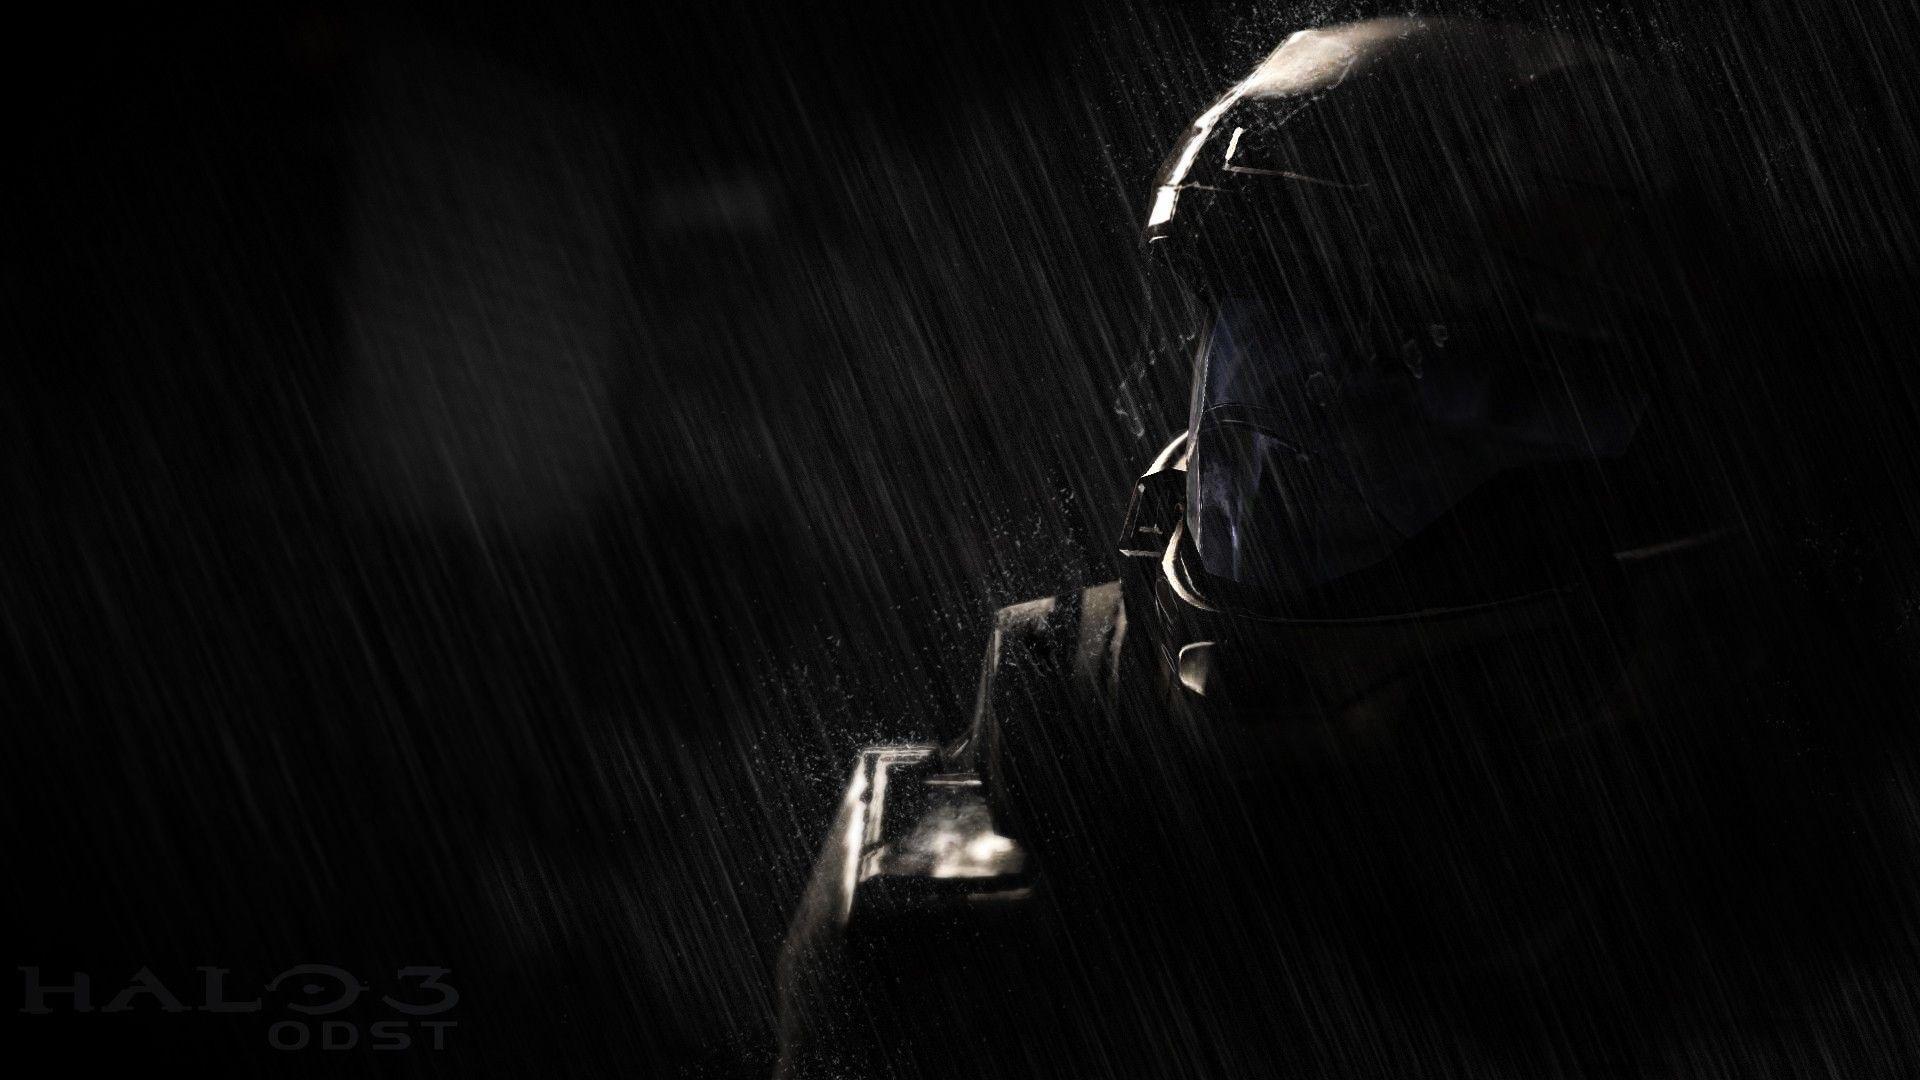 Rain in the game Halo 3 ODST wallpaper and image